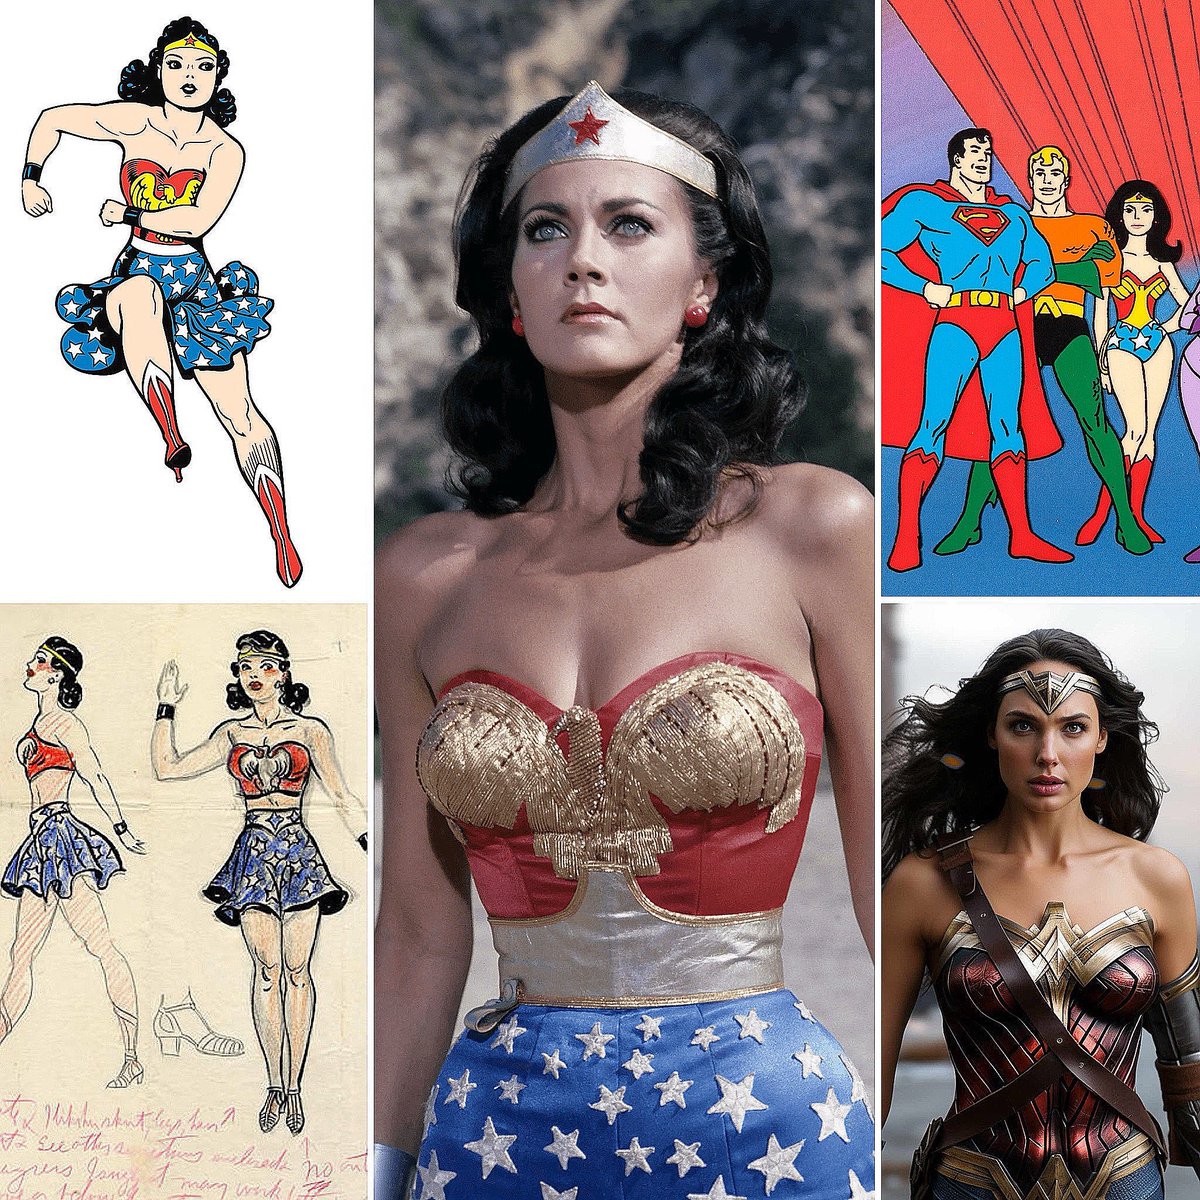 It's apparently #WonderWomanDay. I've been a superhero fan as long as I can remember. @GalGadot was extraordinary, but Lynda Carter will always be THE Princess Diana and #WonderWoman! Still think about that show, including her spin to transform ... #nostalgia! #SuperFriends